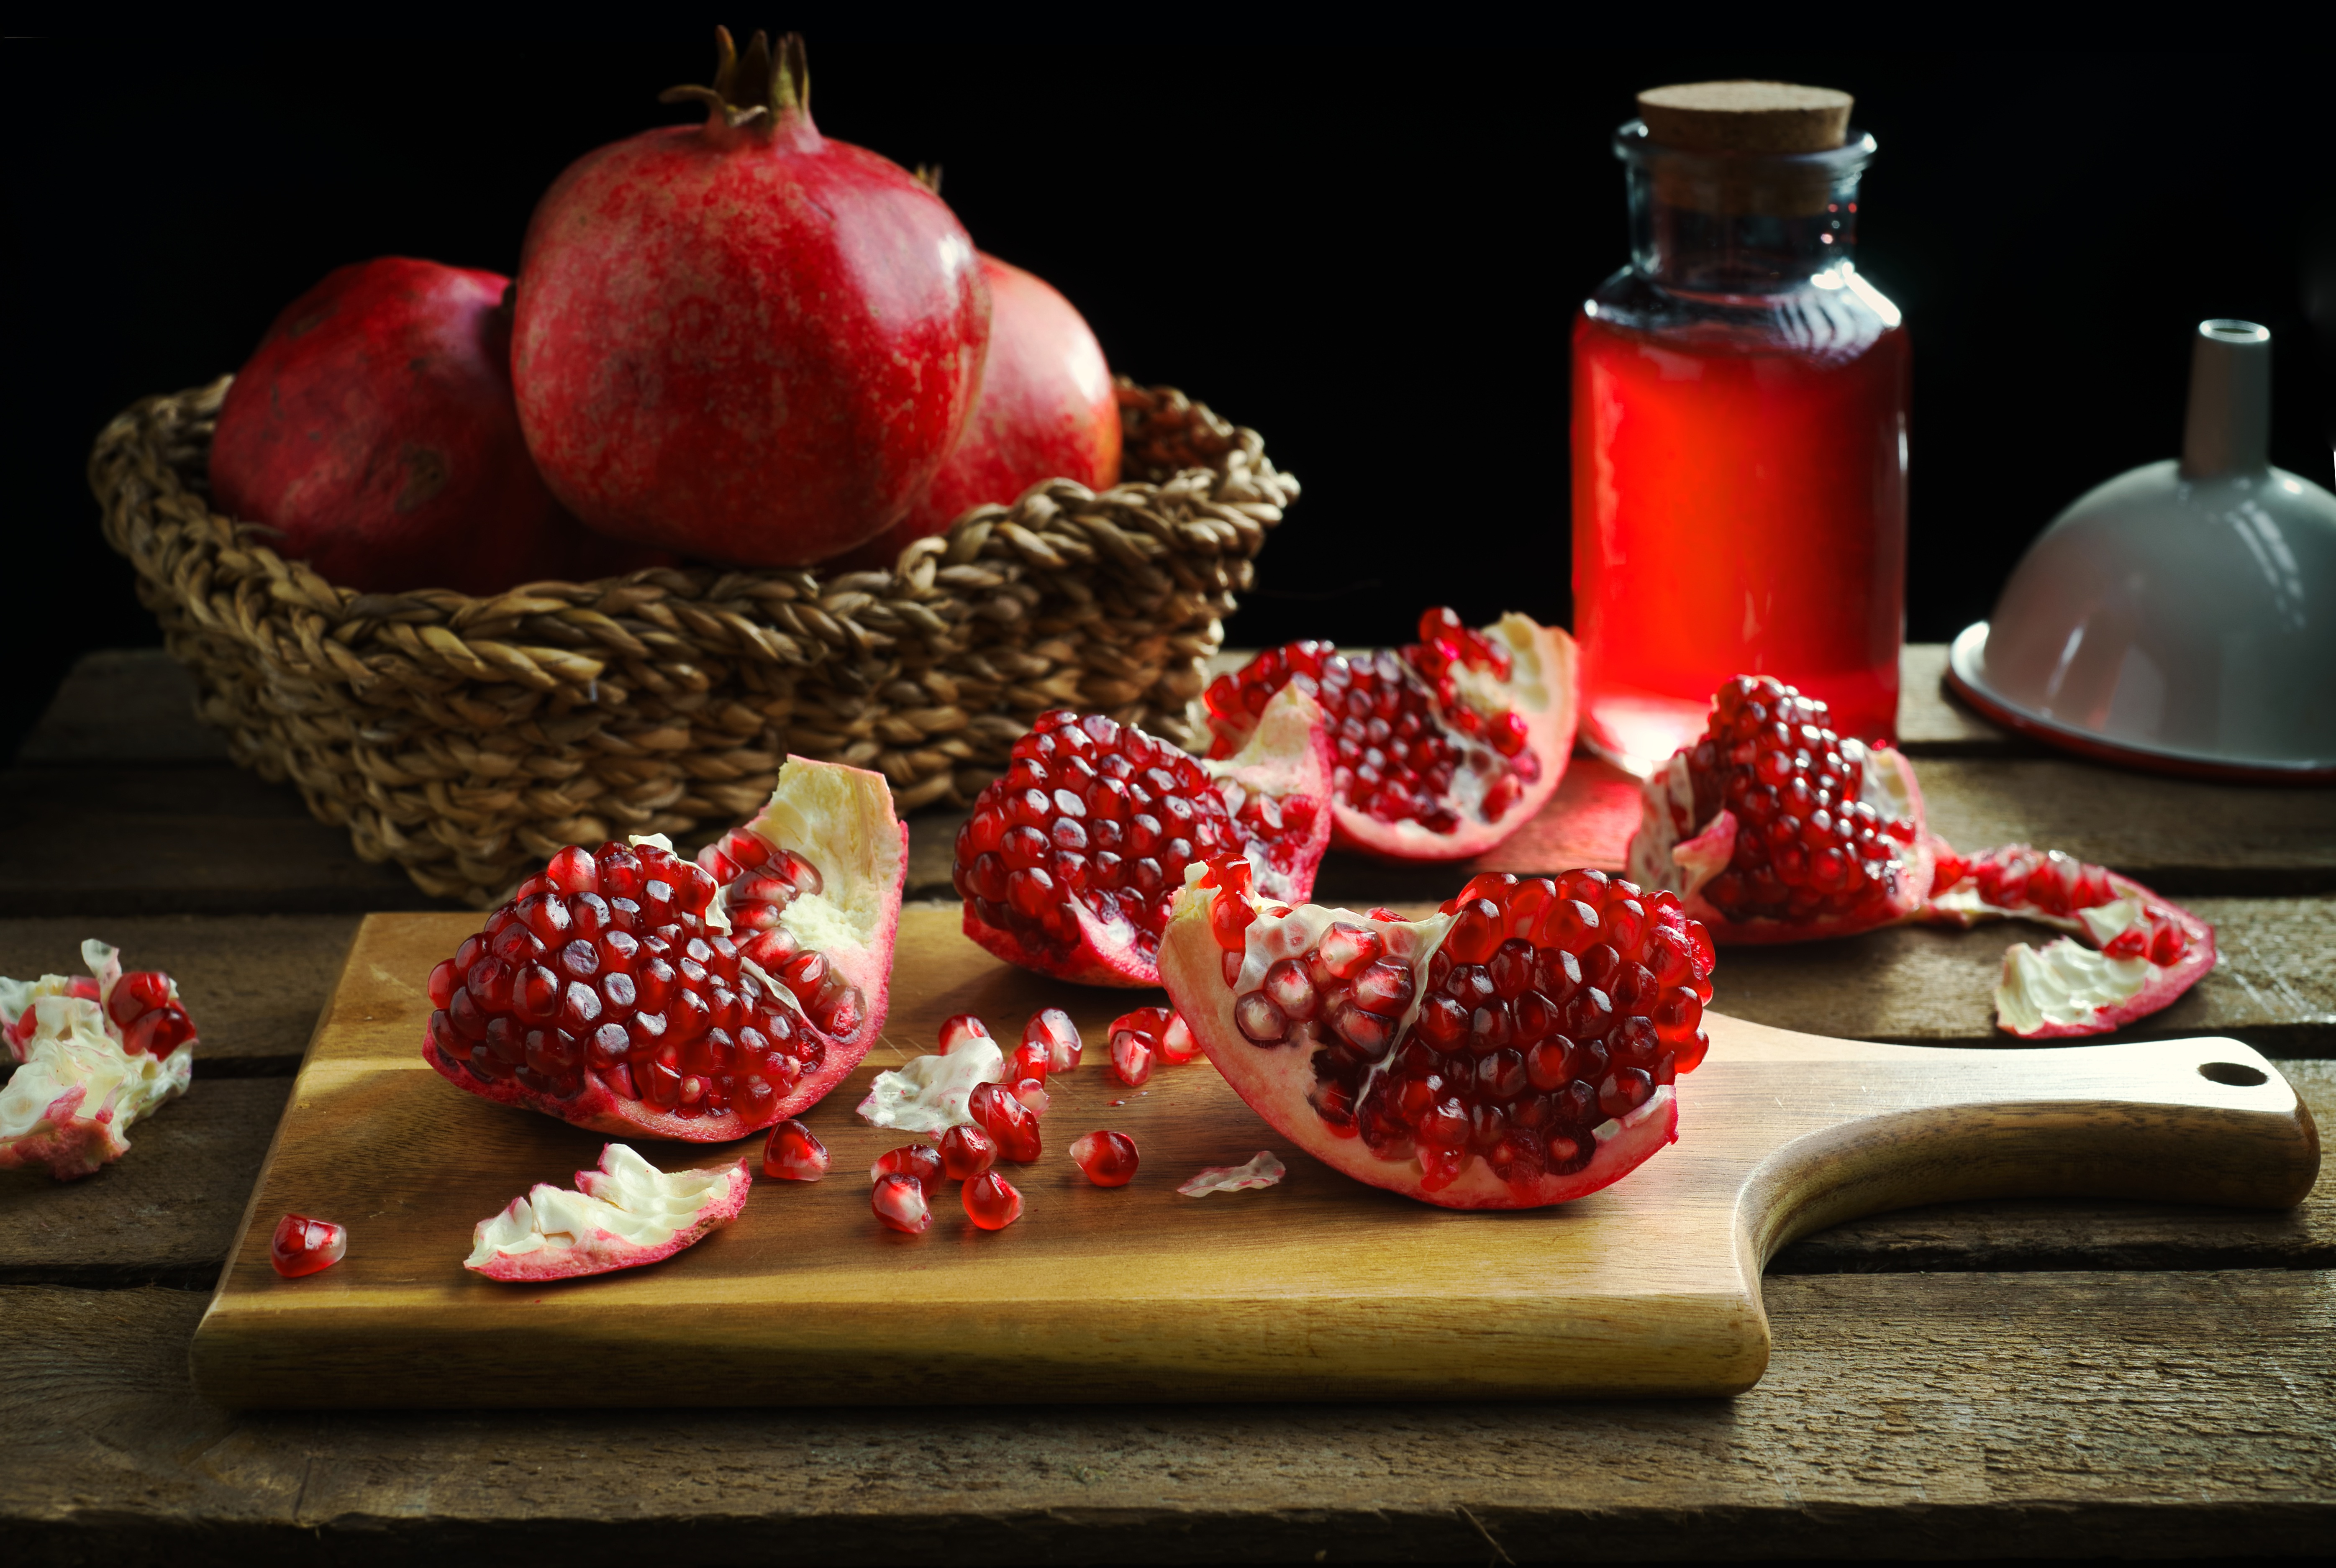 Download wallpaper 1350x2400 pomegranate fruit red ripe iphone  876s6 for parallax hd background